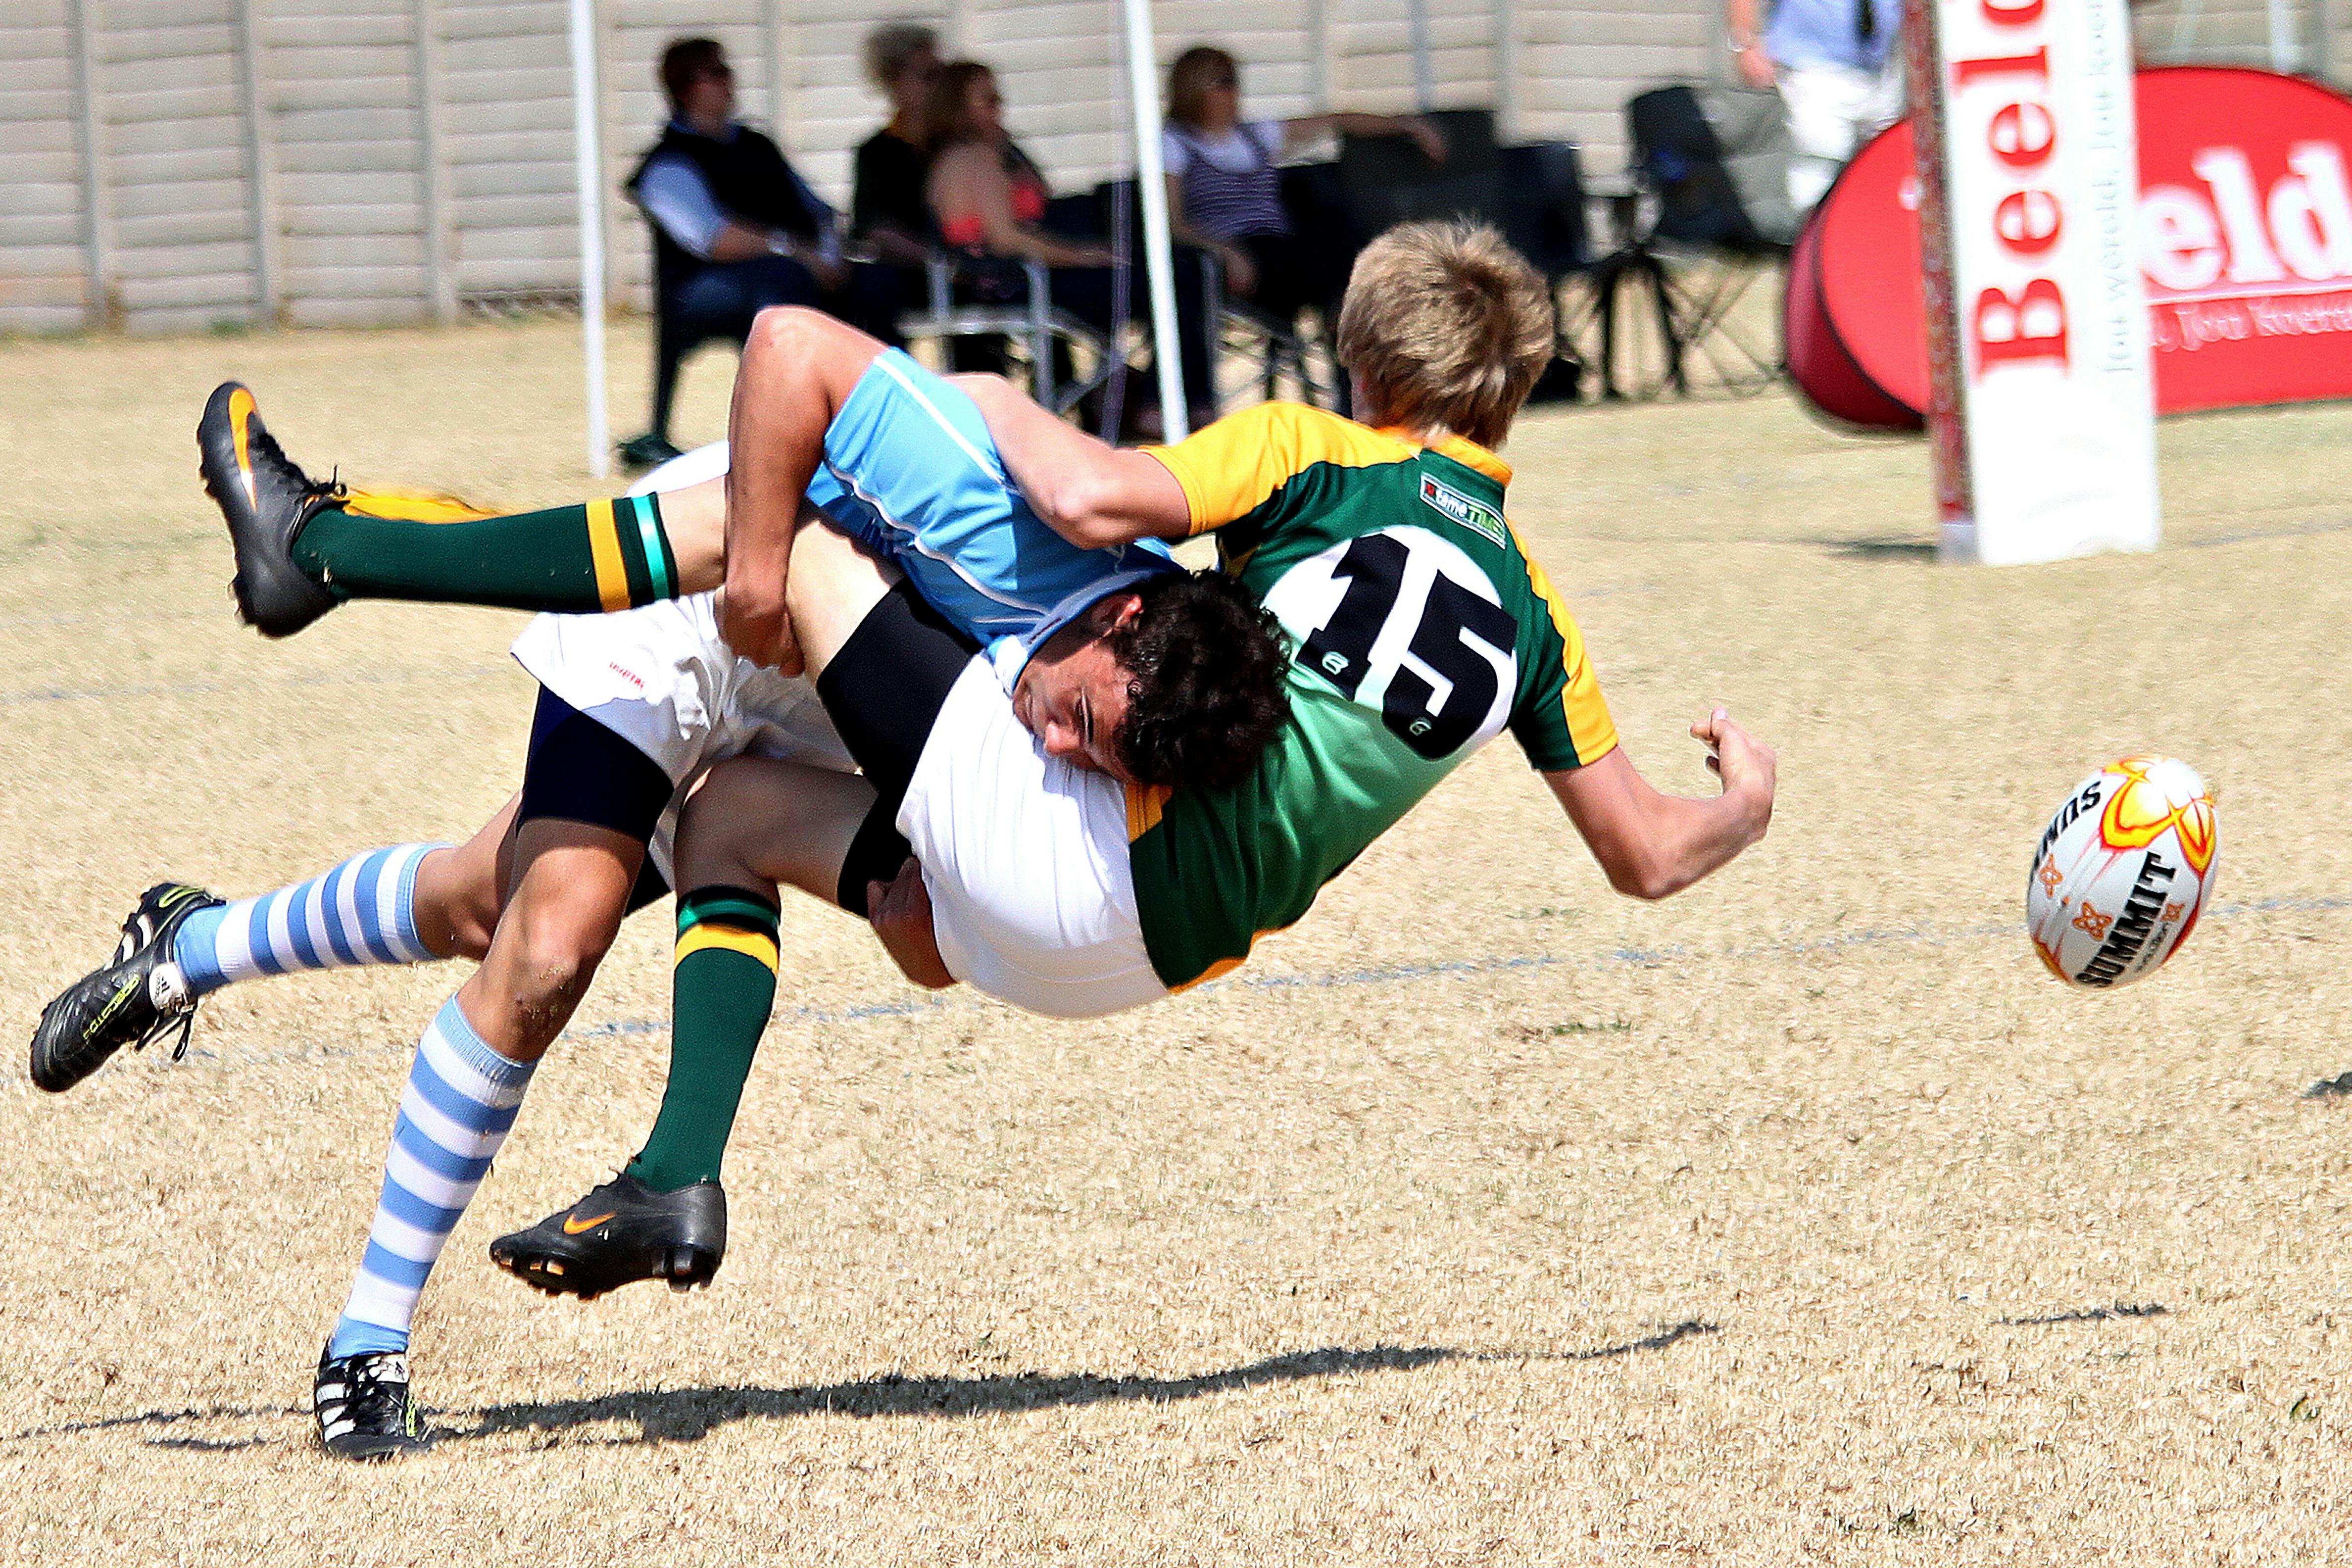 players colliding during rugby game